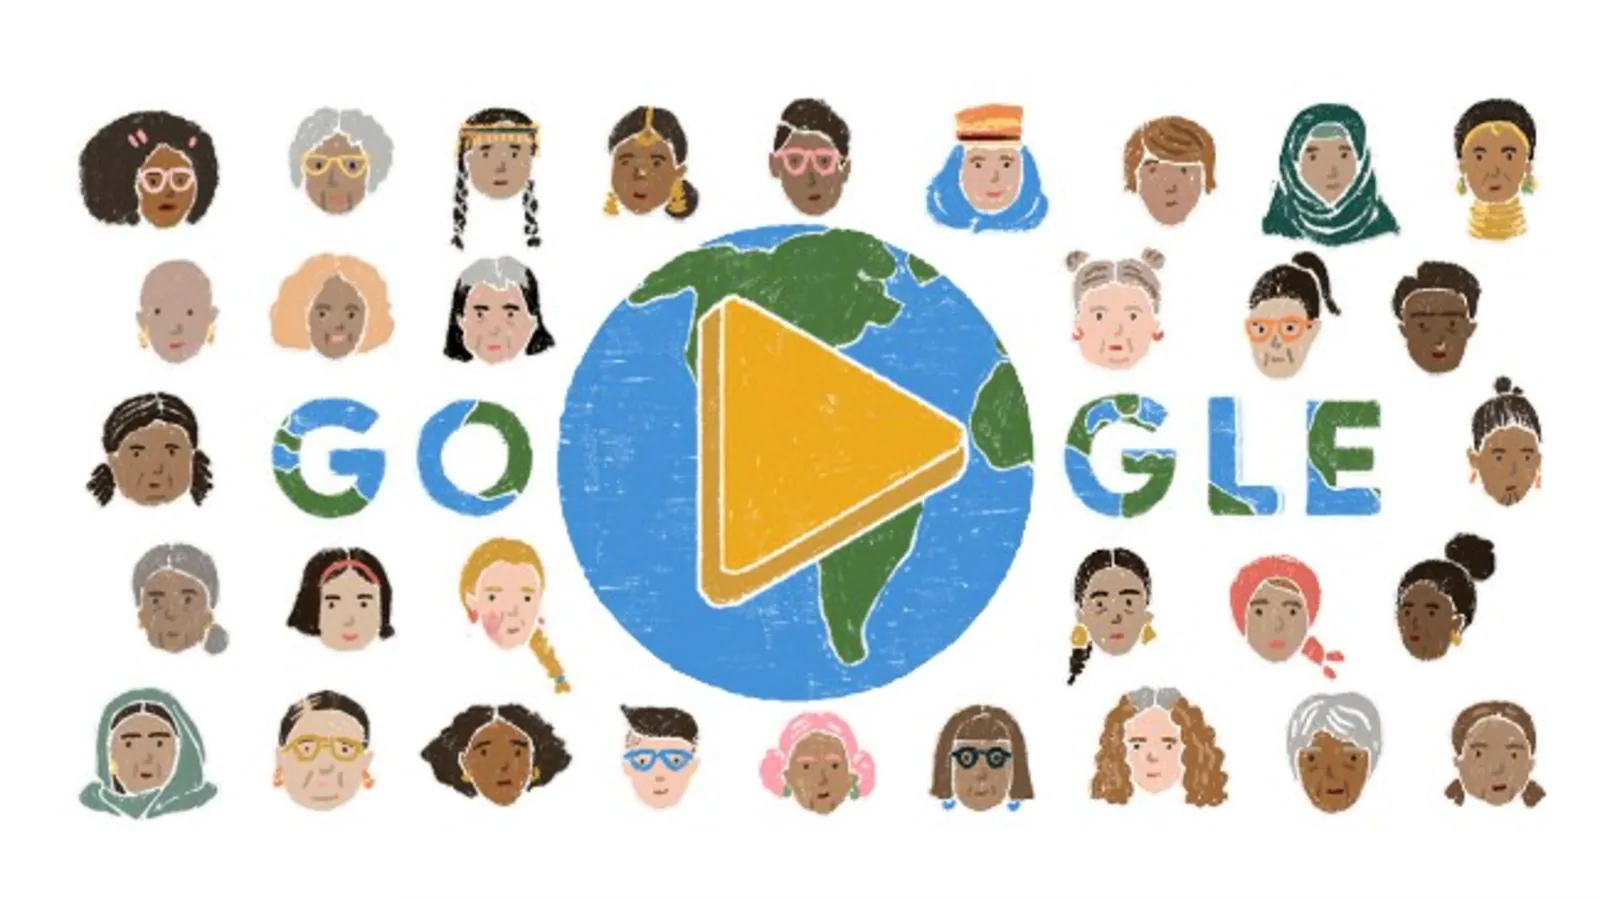 Women’s Day 2022: Google Doodle celebrates with animated video featuring women acing diverse roles in society